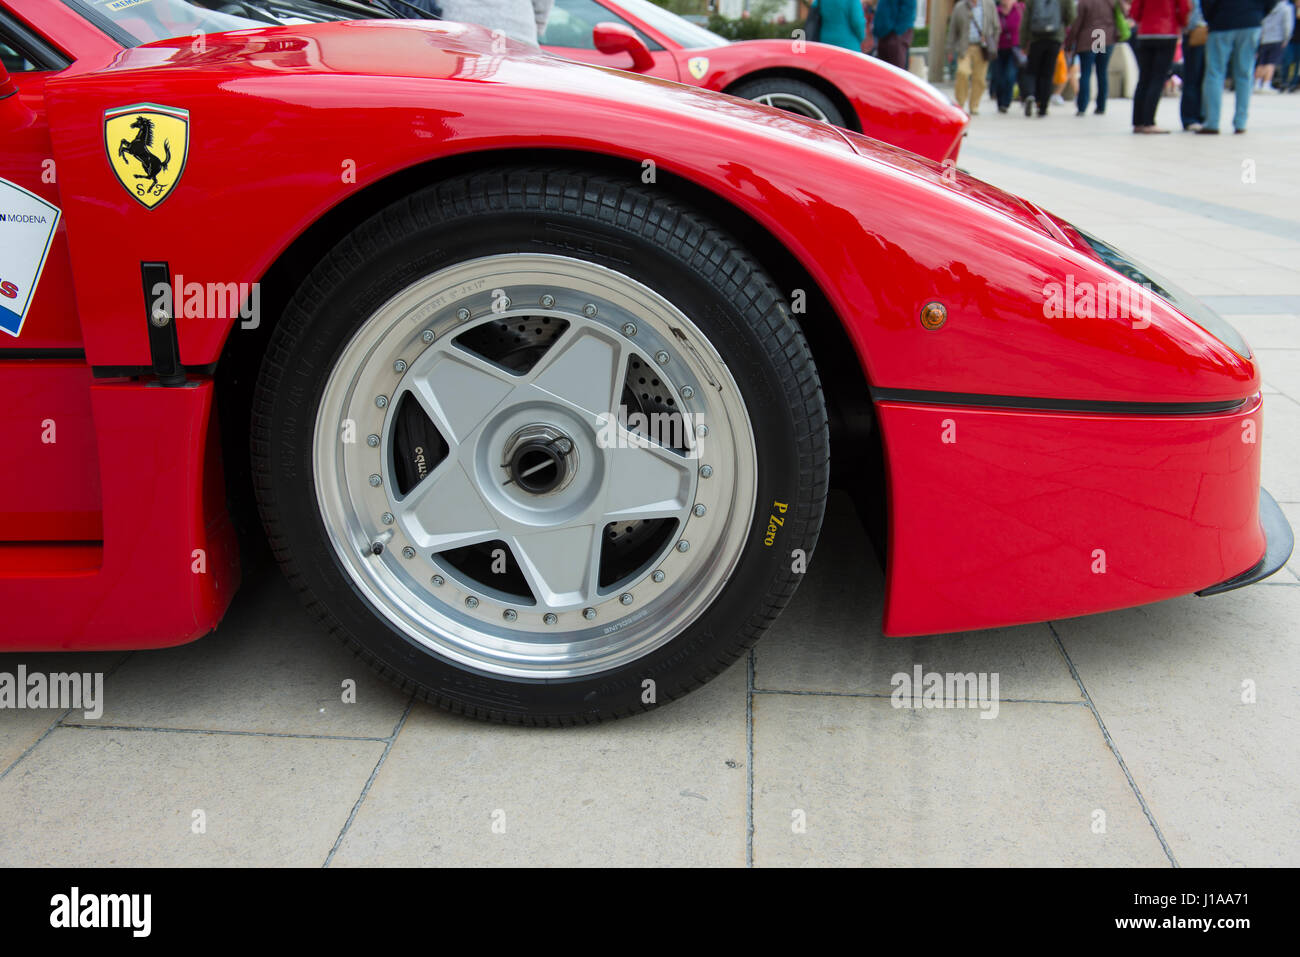 The front wheel and nose of the iconic Ferrari F40 which was introduced in 1987 Stock Photo